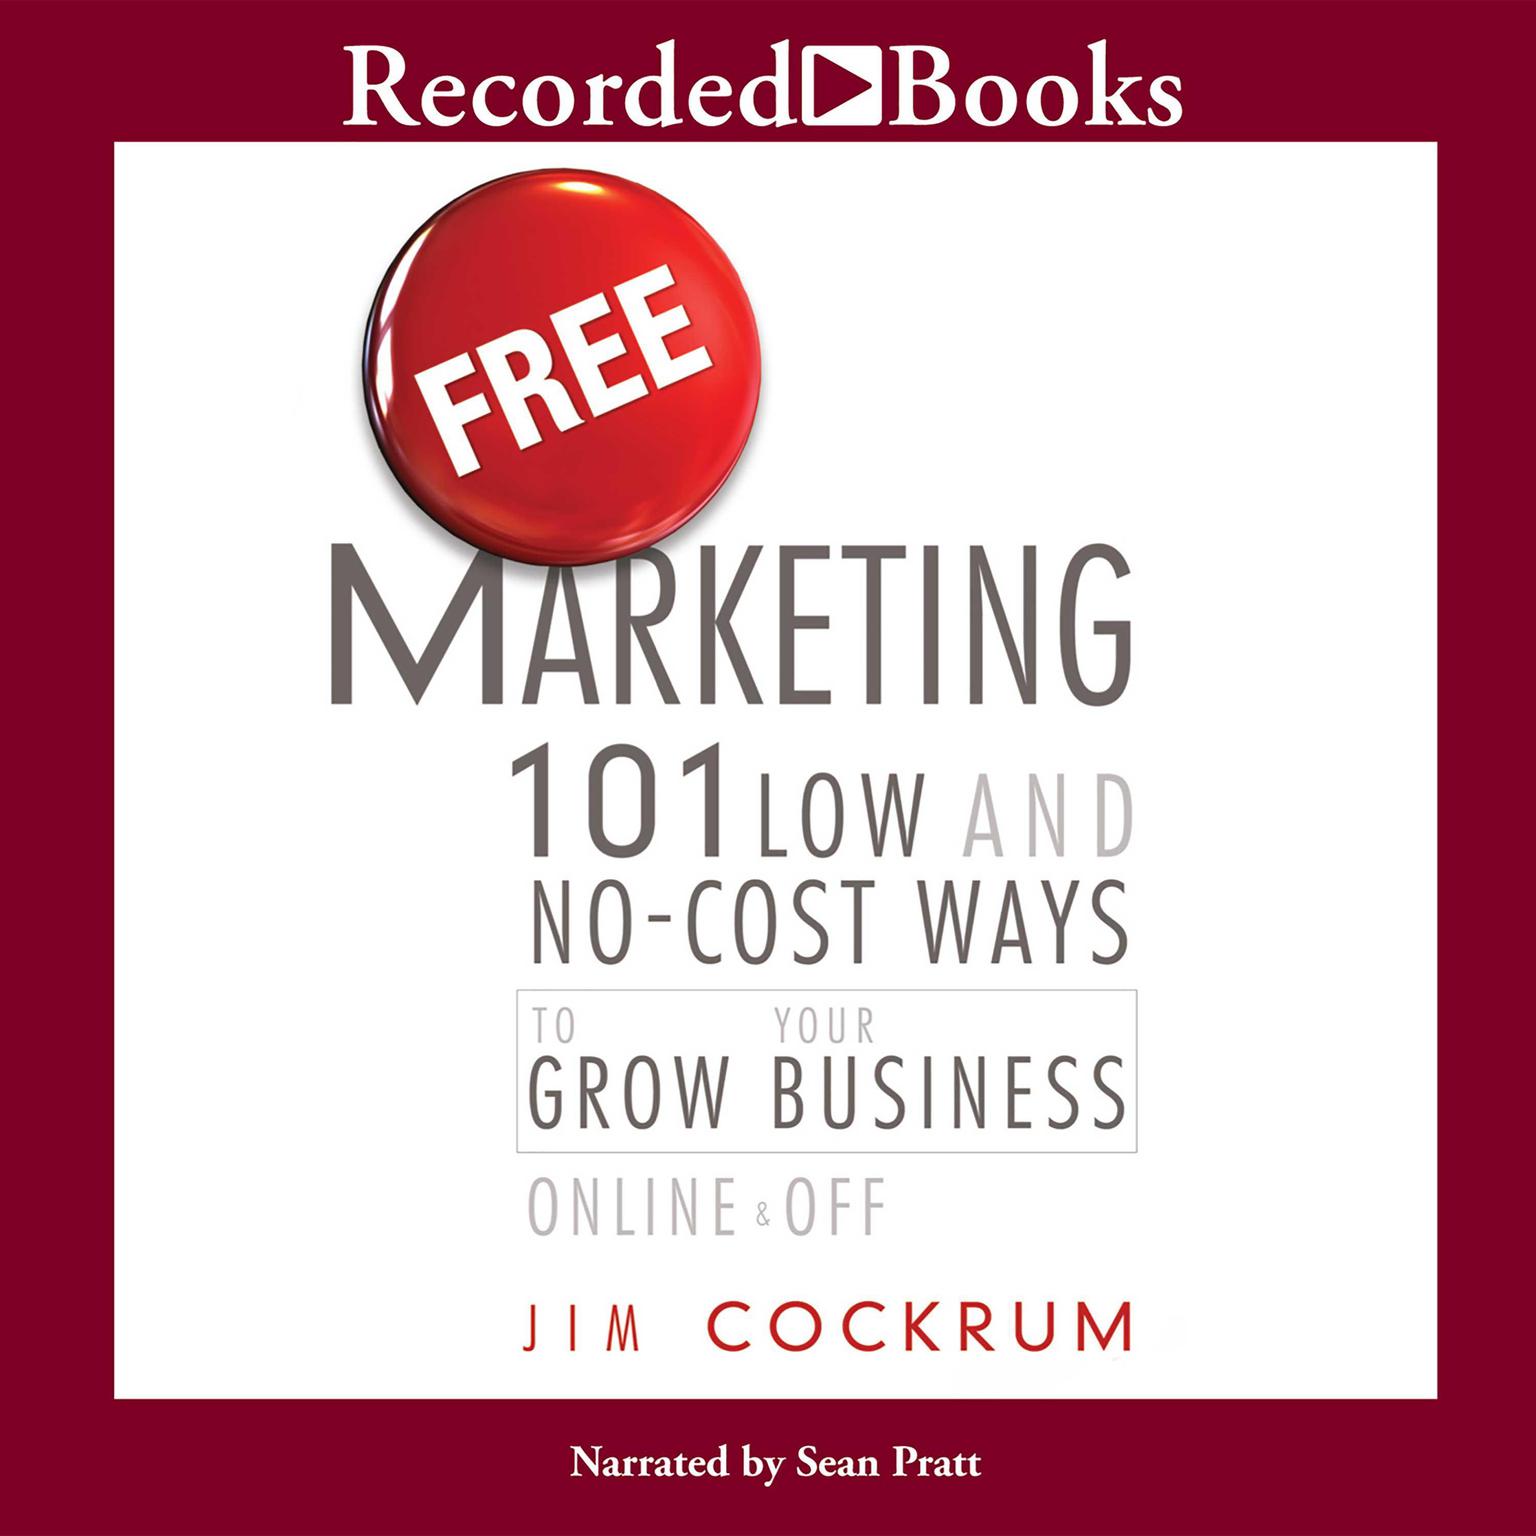 Free Marketing: 101 Low and No-Cost Ways to Grow Your Business, Online and Off Audiobook, by Jim Cockrum